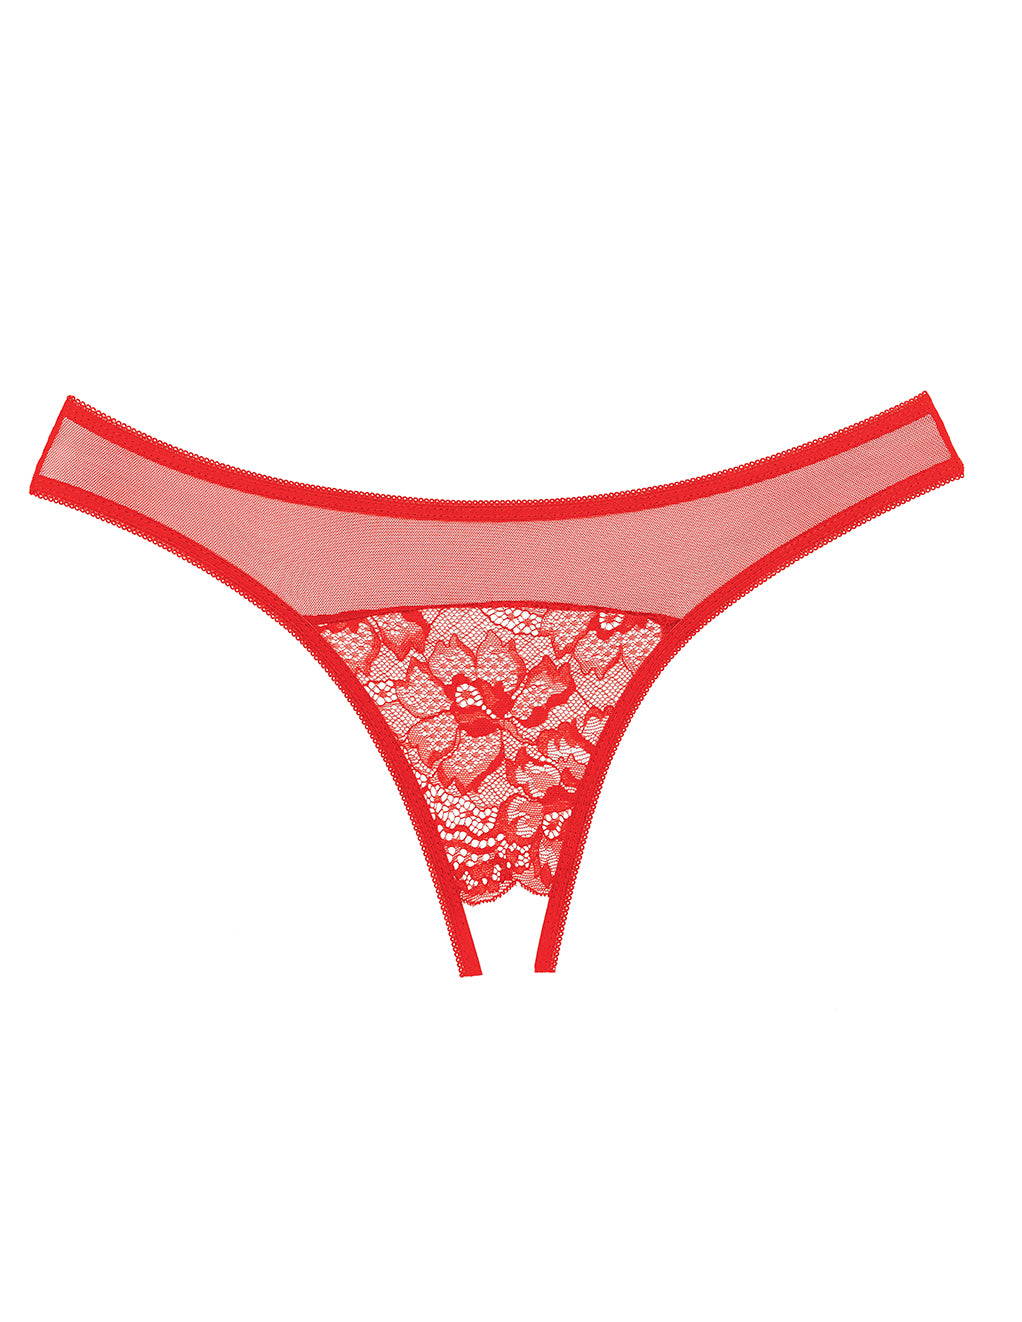 Allure Lingerie Floral Lace Crotchless Panty- Red- Front